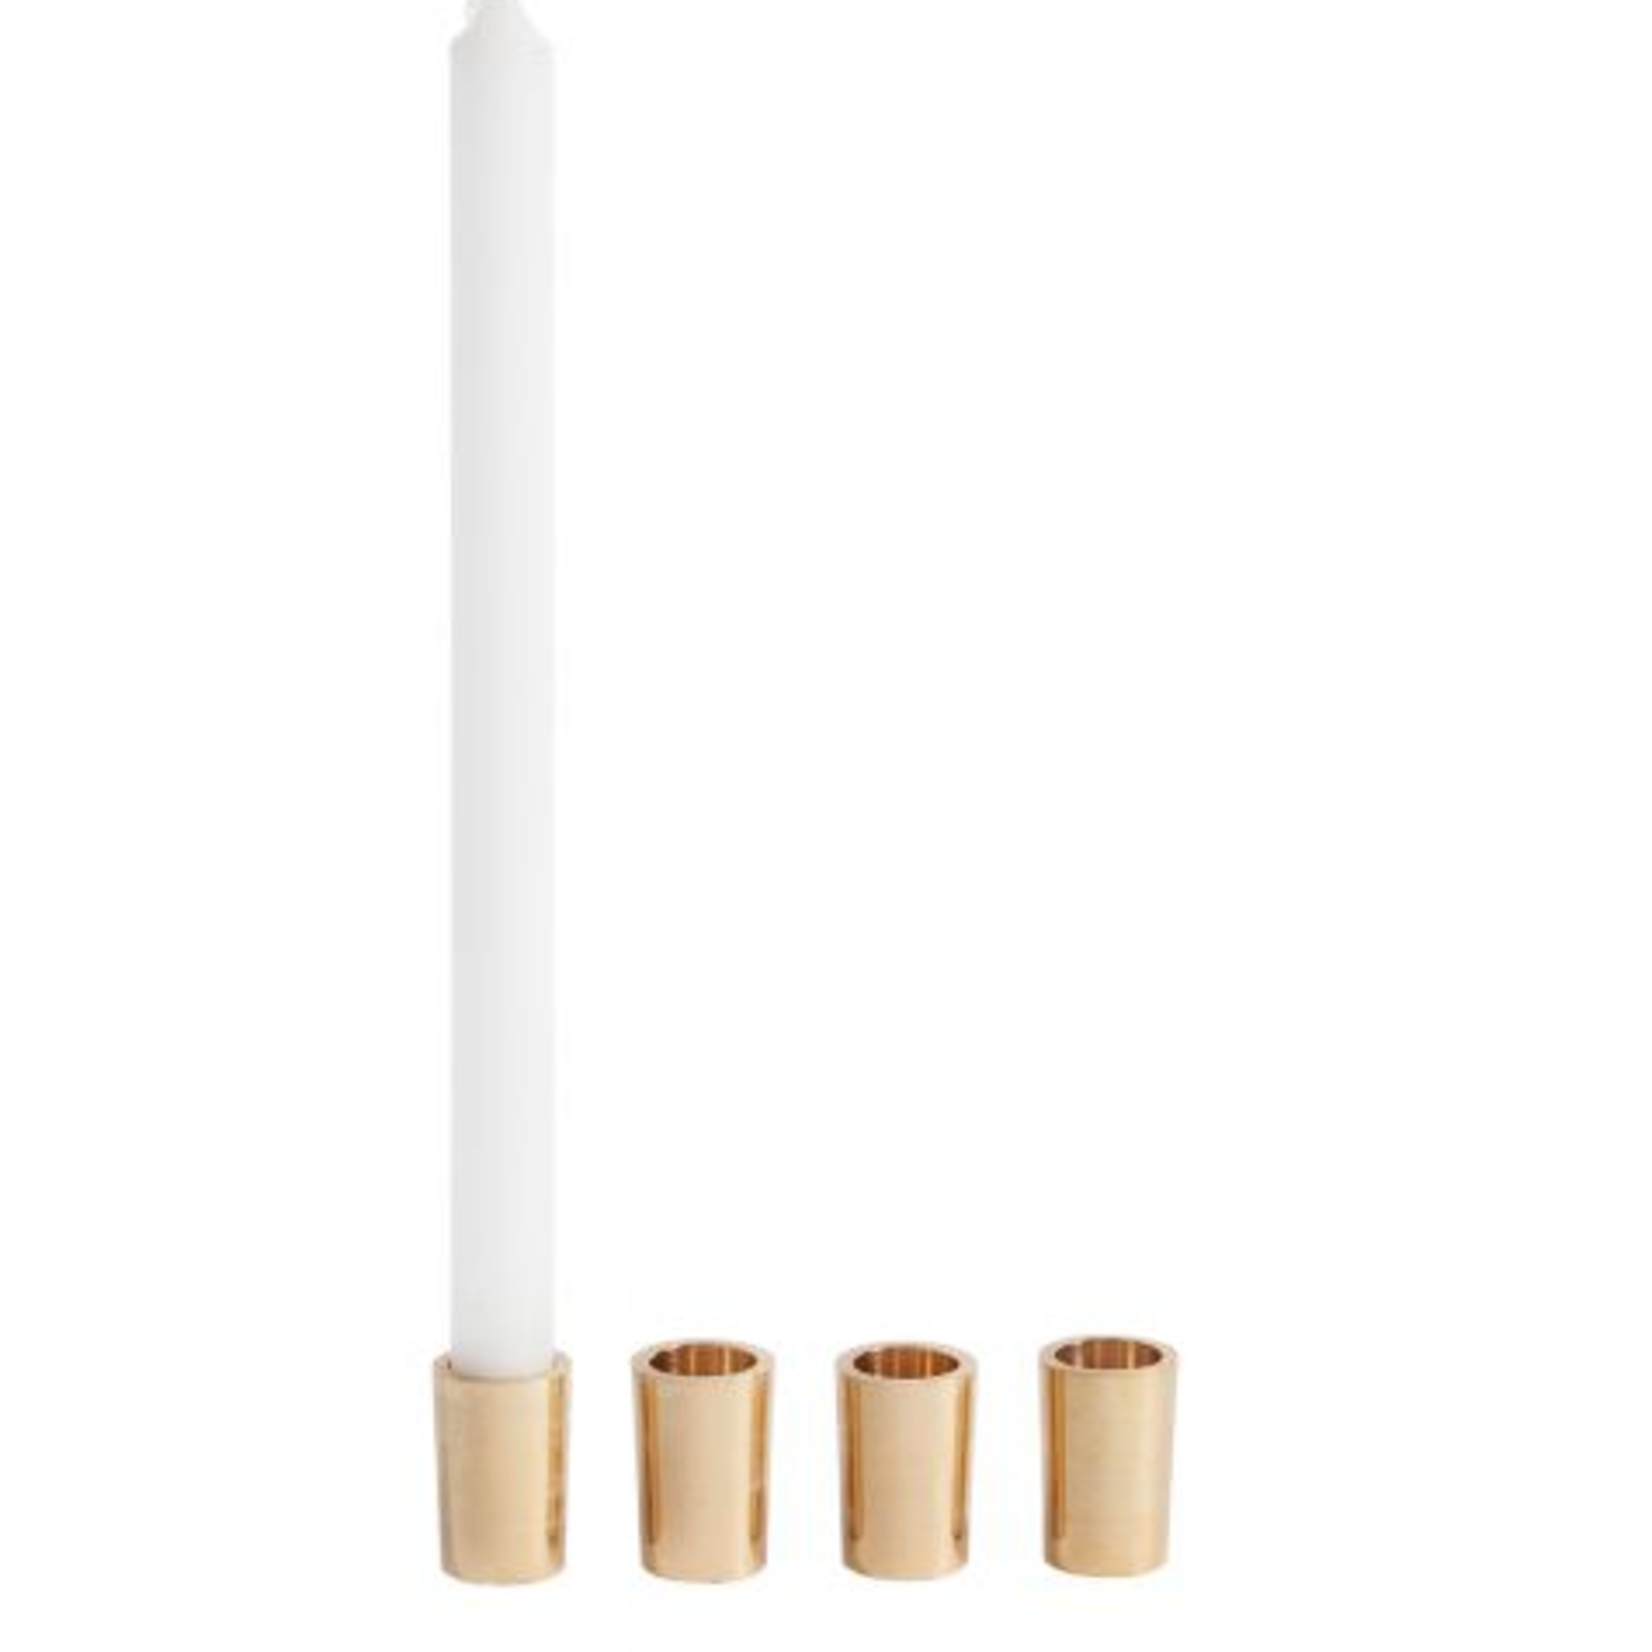 1.75"H X 1" TUNE CANDLE STICKHOLDER SOLD IN PACKS OF 4PCS